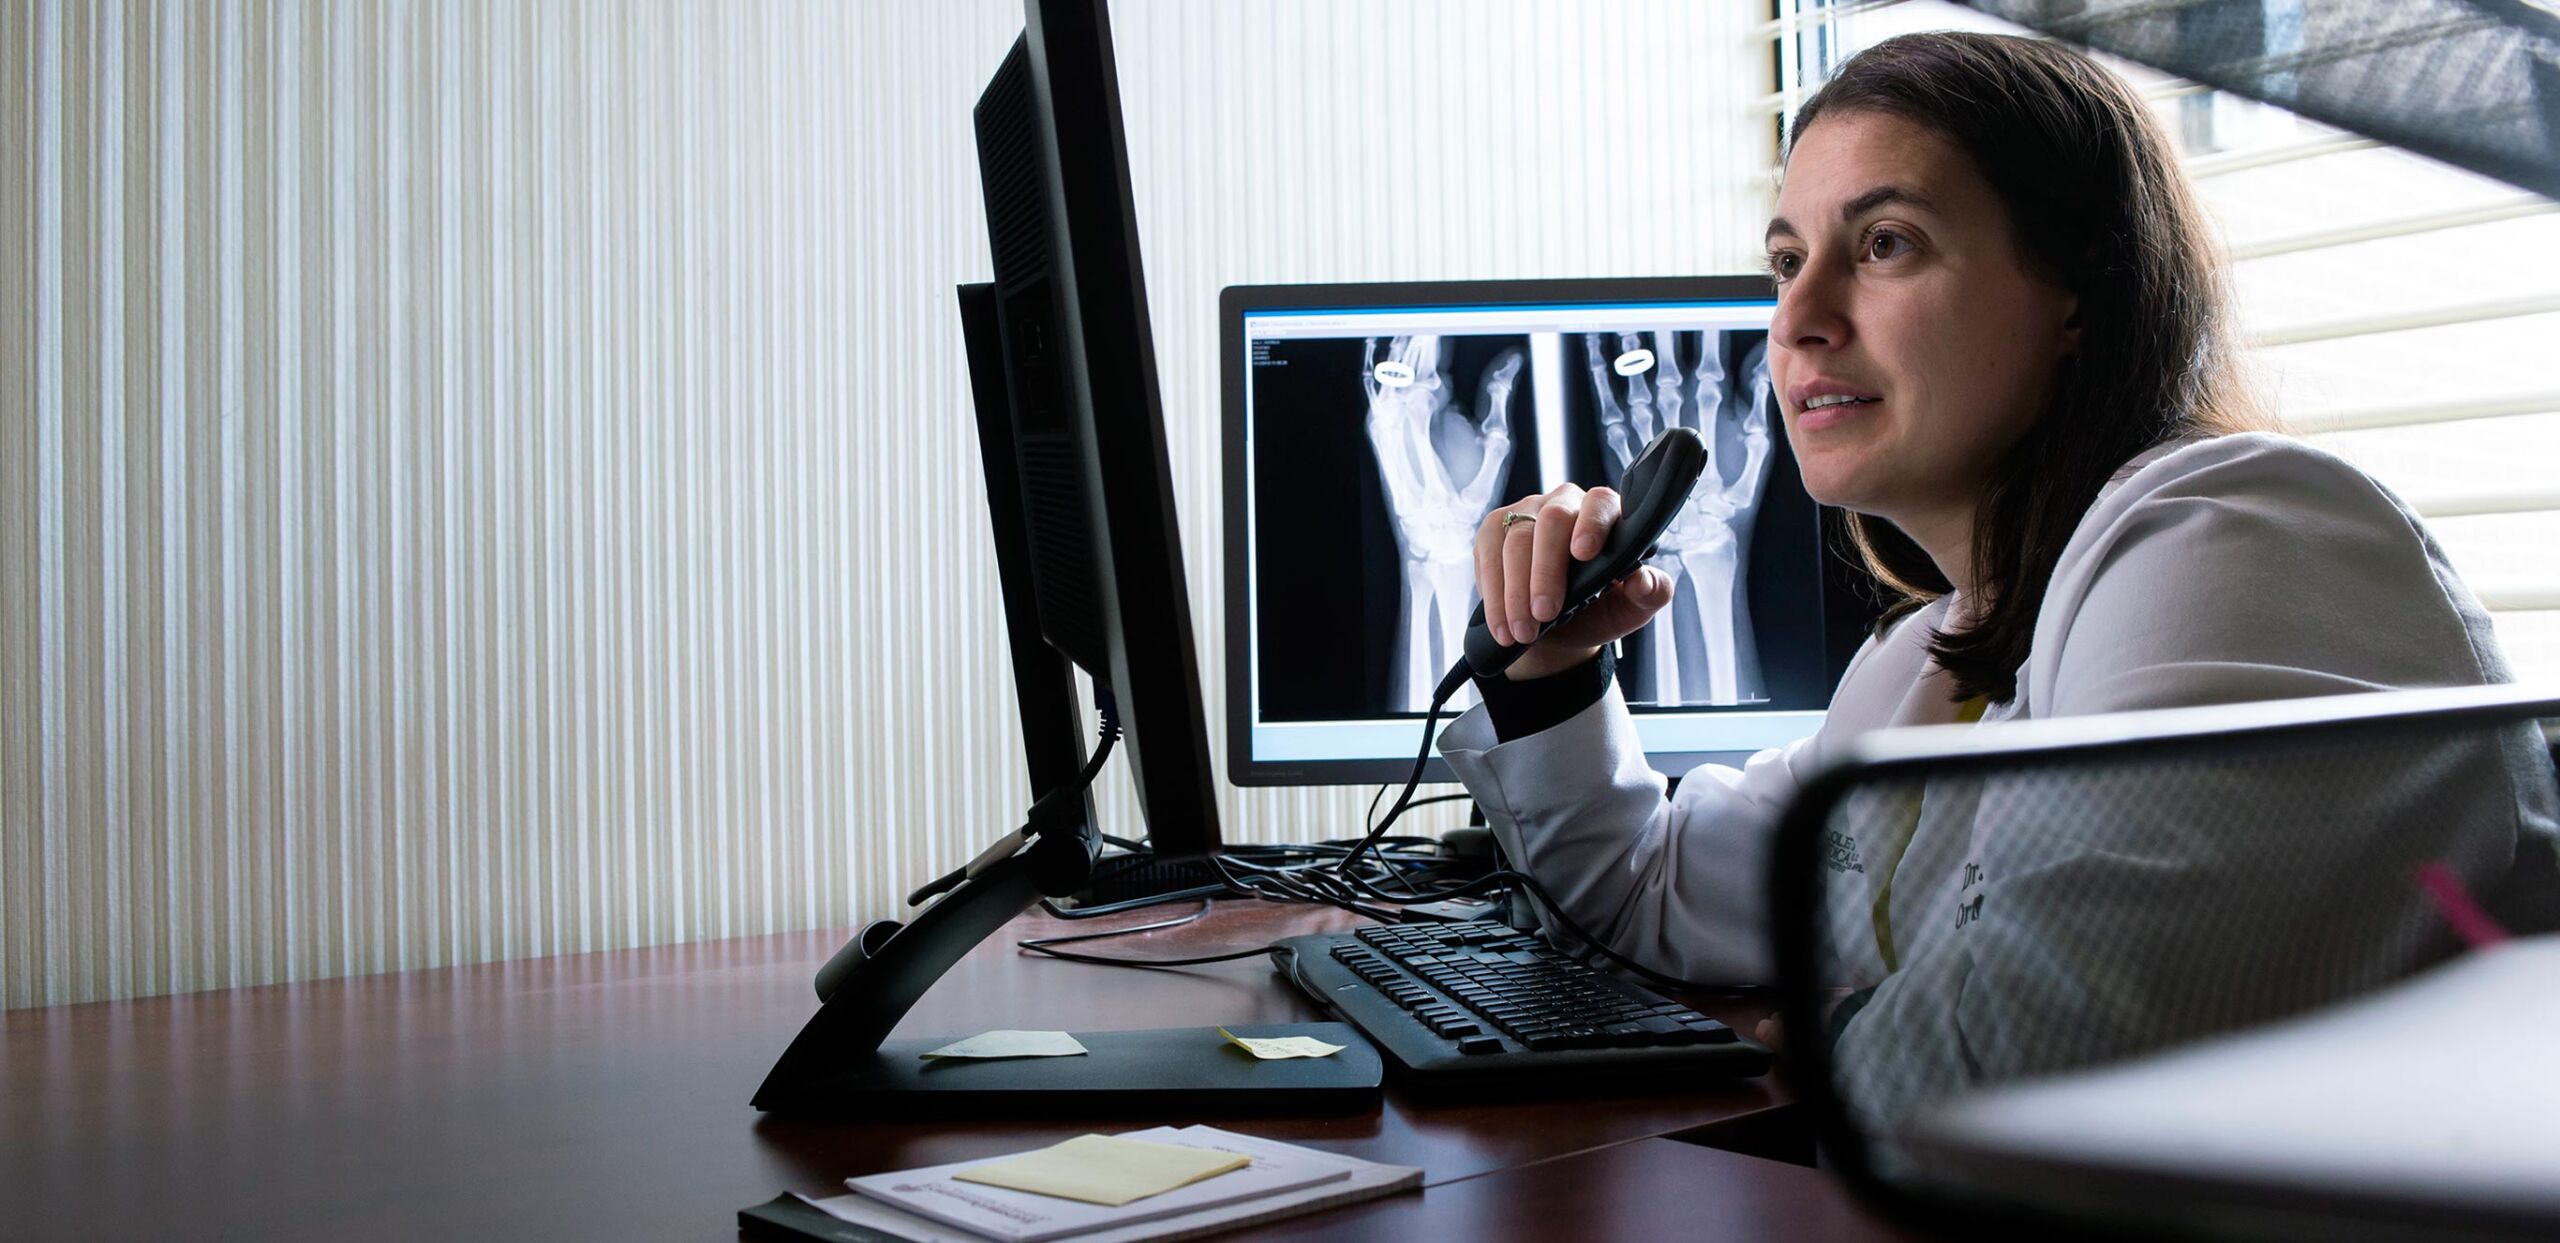 Orthopedist Teresa Pianta, MD, records her diagnosis of a patient's hand x-ray at Cooley Dickinson Medical Group Orthopedic and Sports Medicine, West Hatfield, MA 01088.